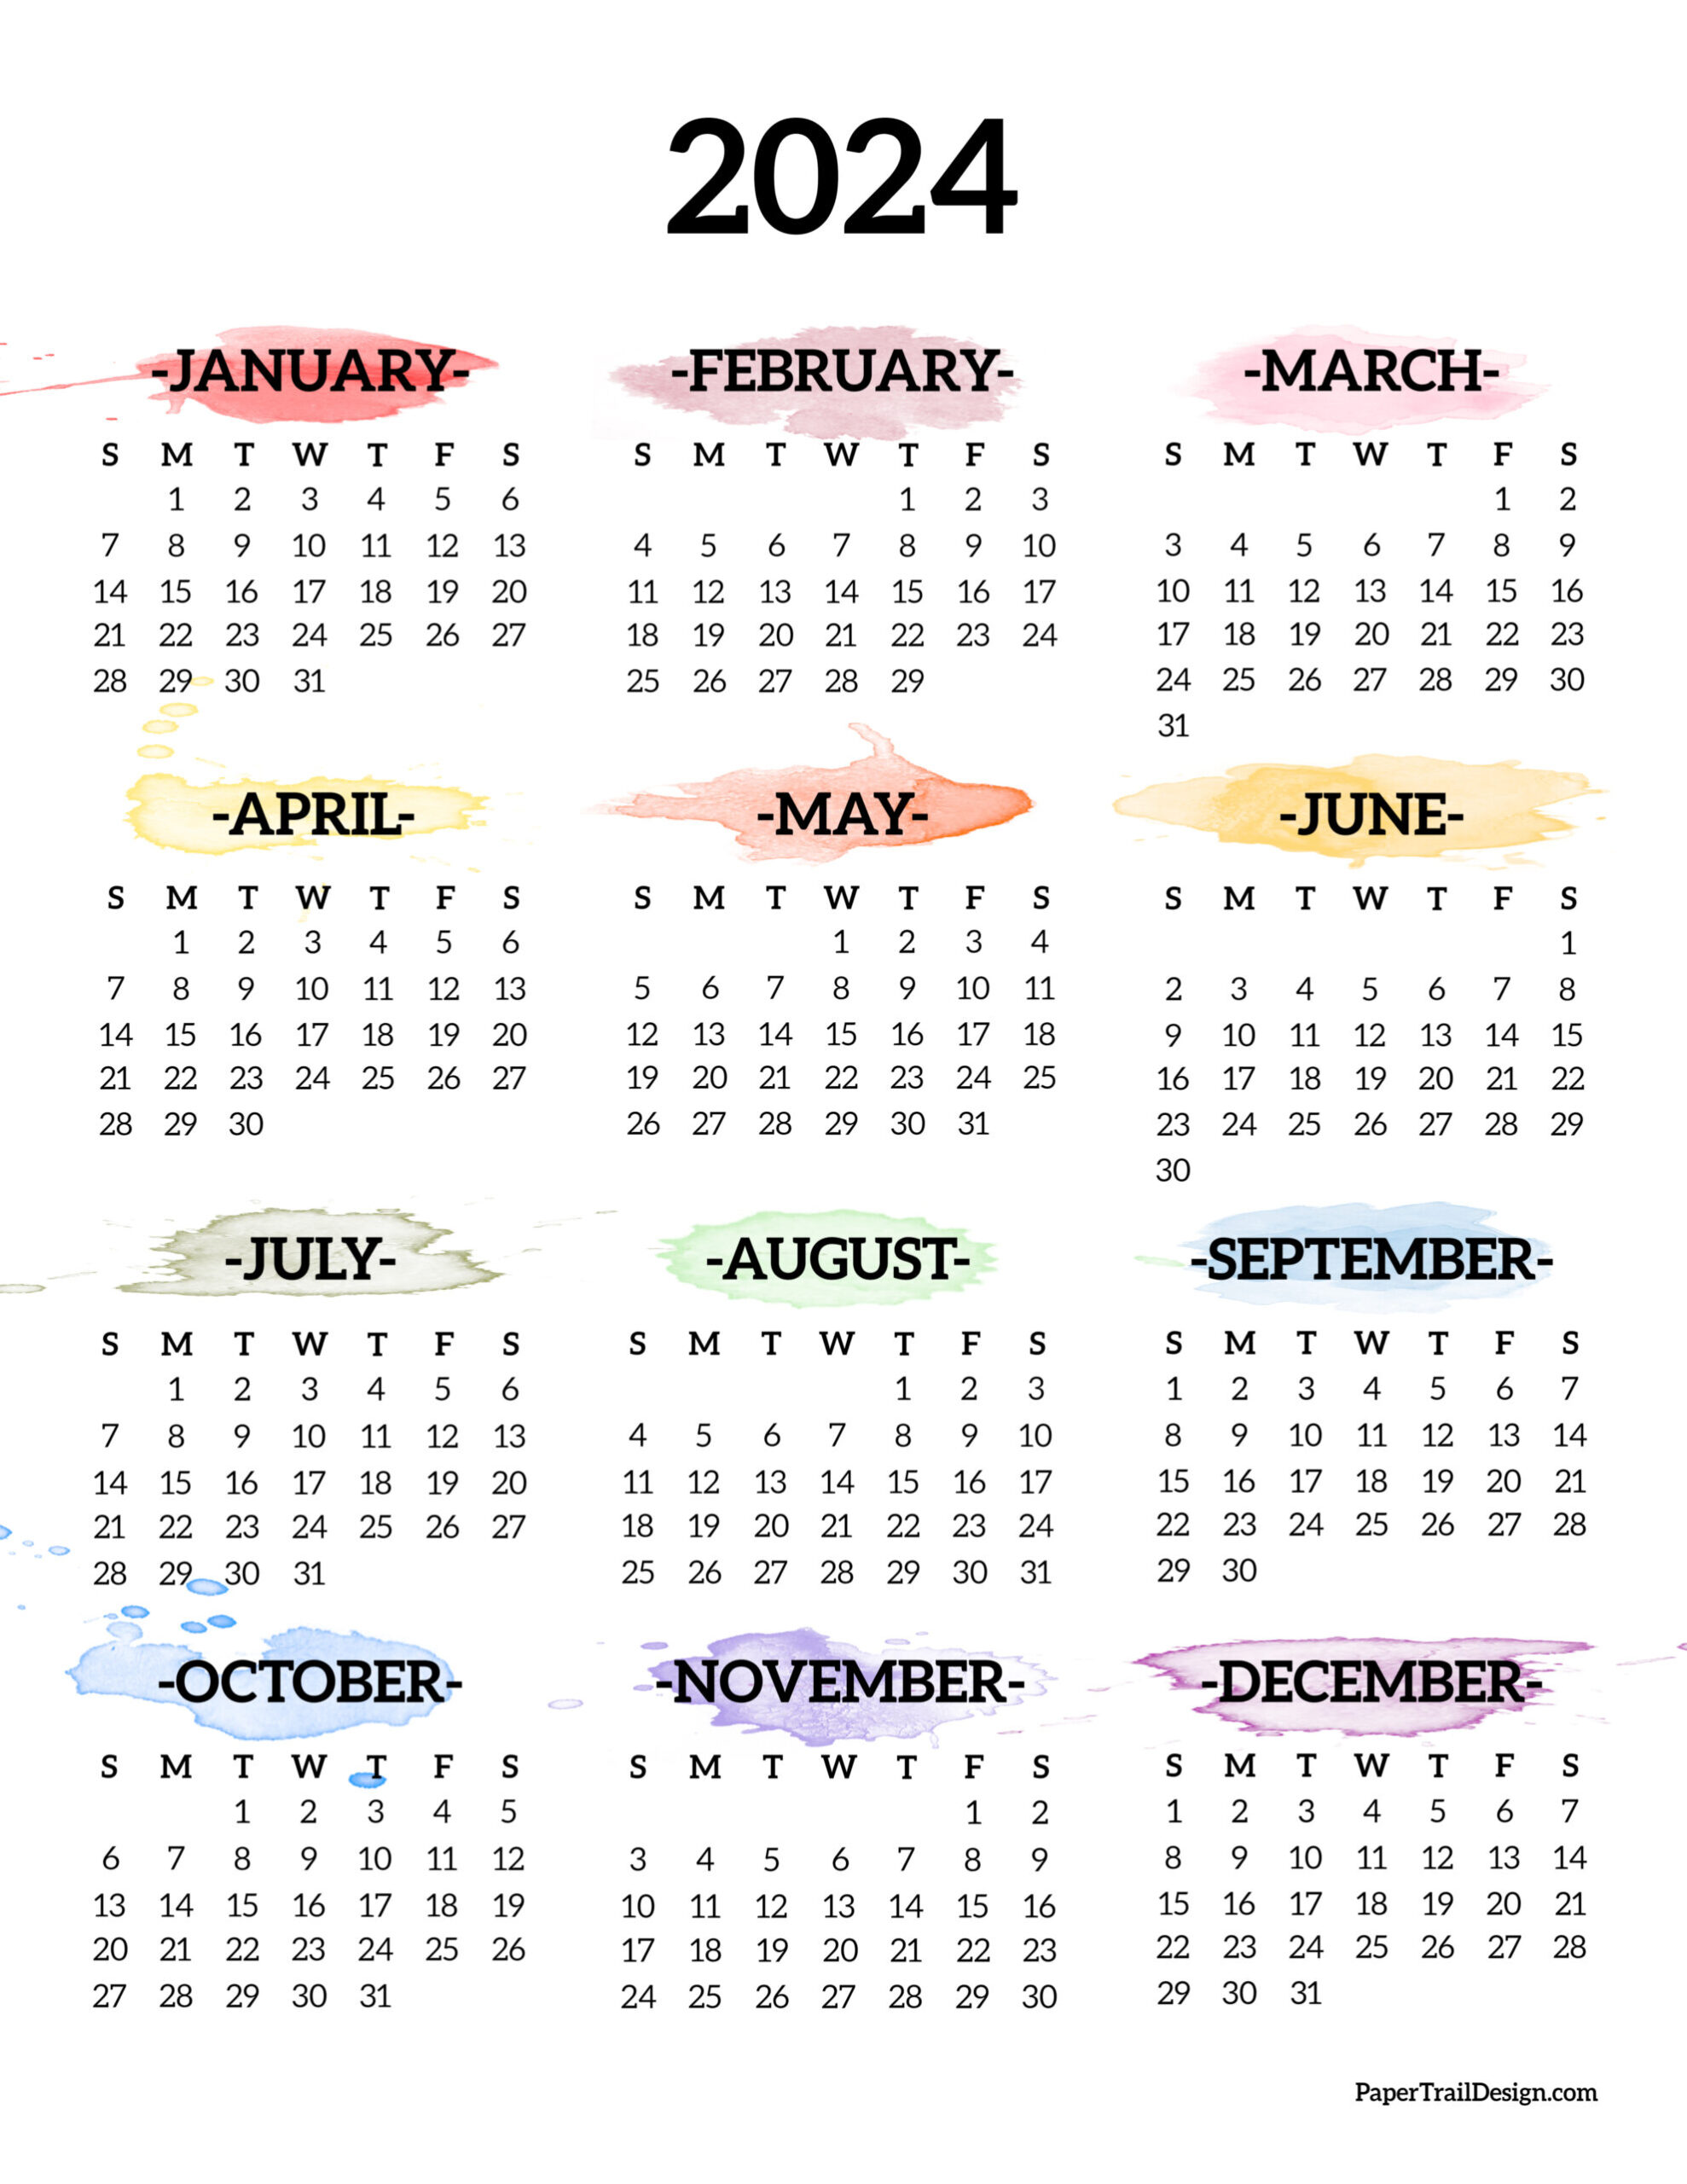 Calendar 2024 Printable One Page - Paper Trail Design for 2024 One Page Calendar Free Printable